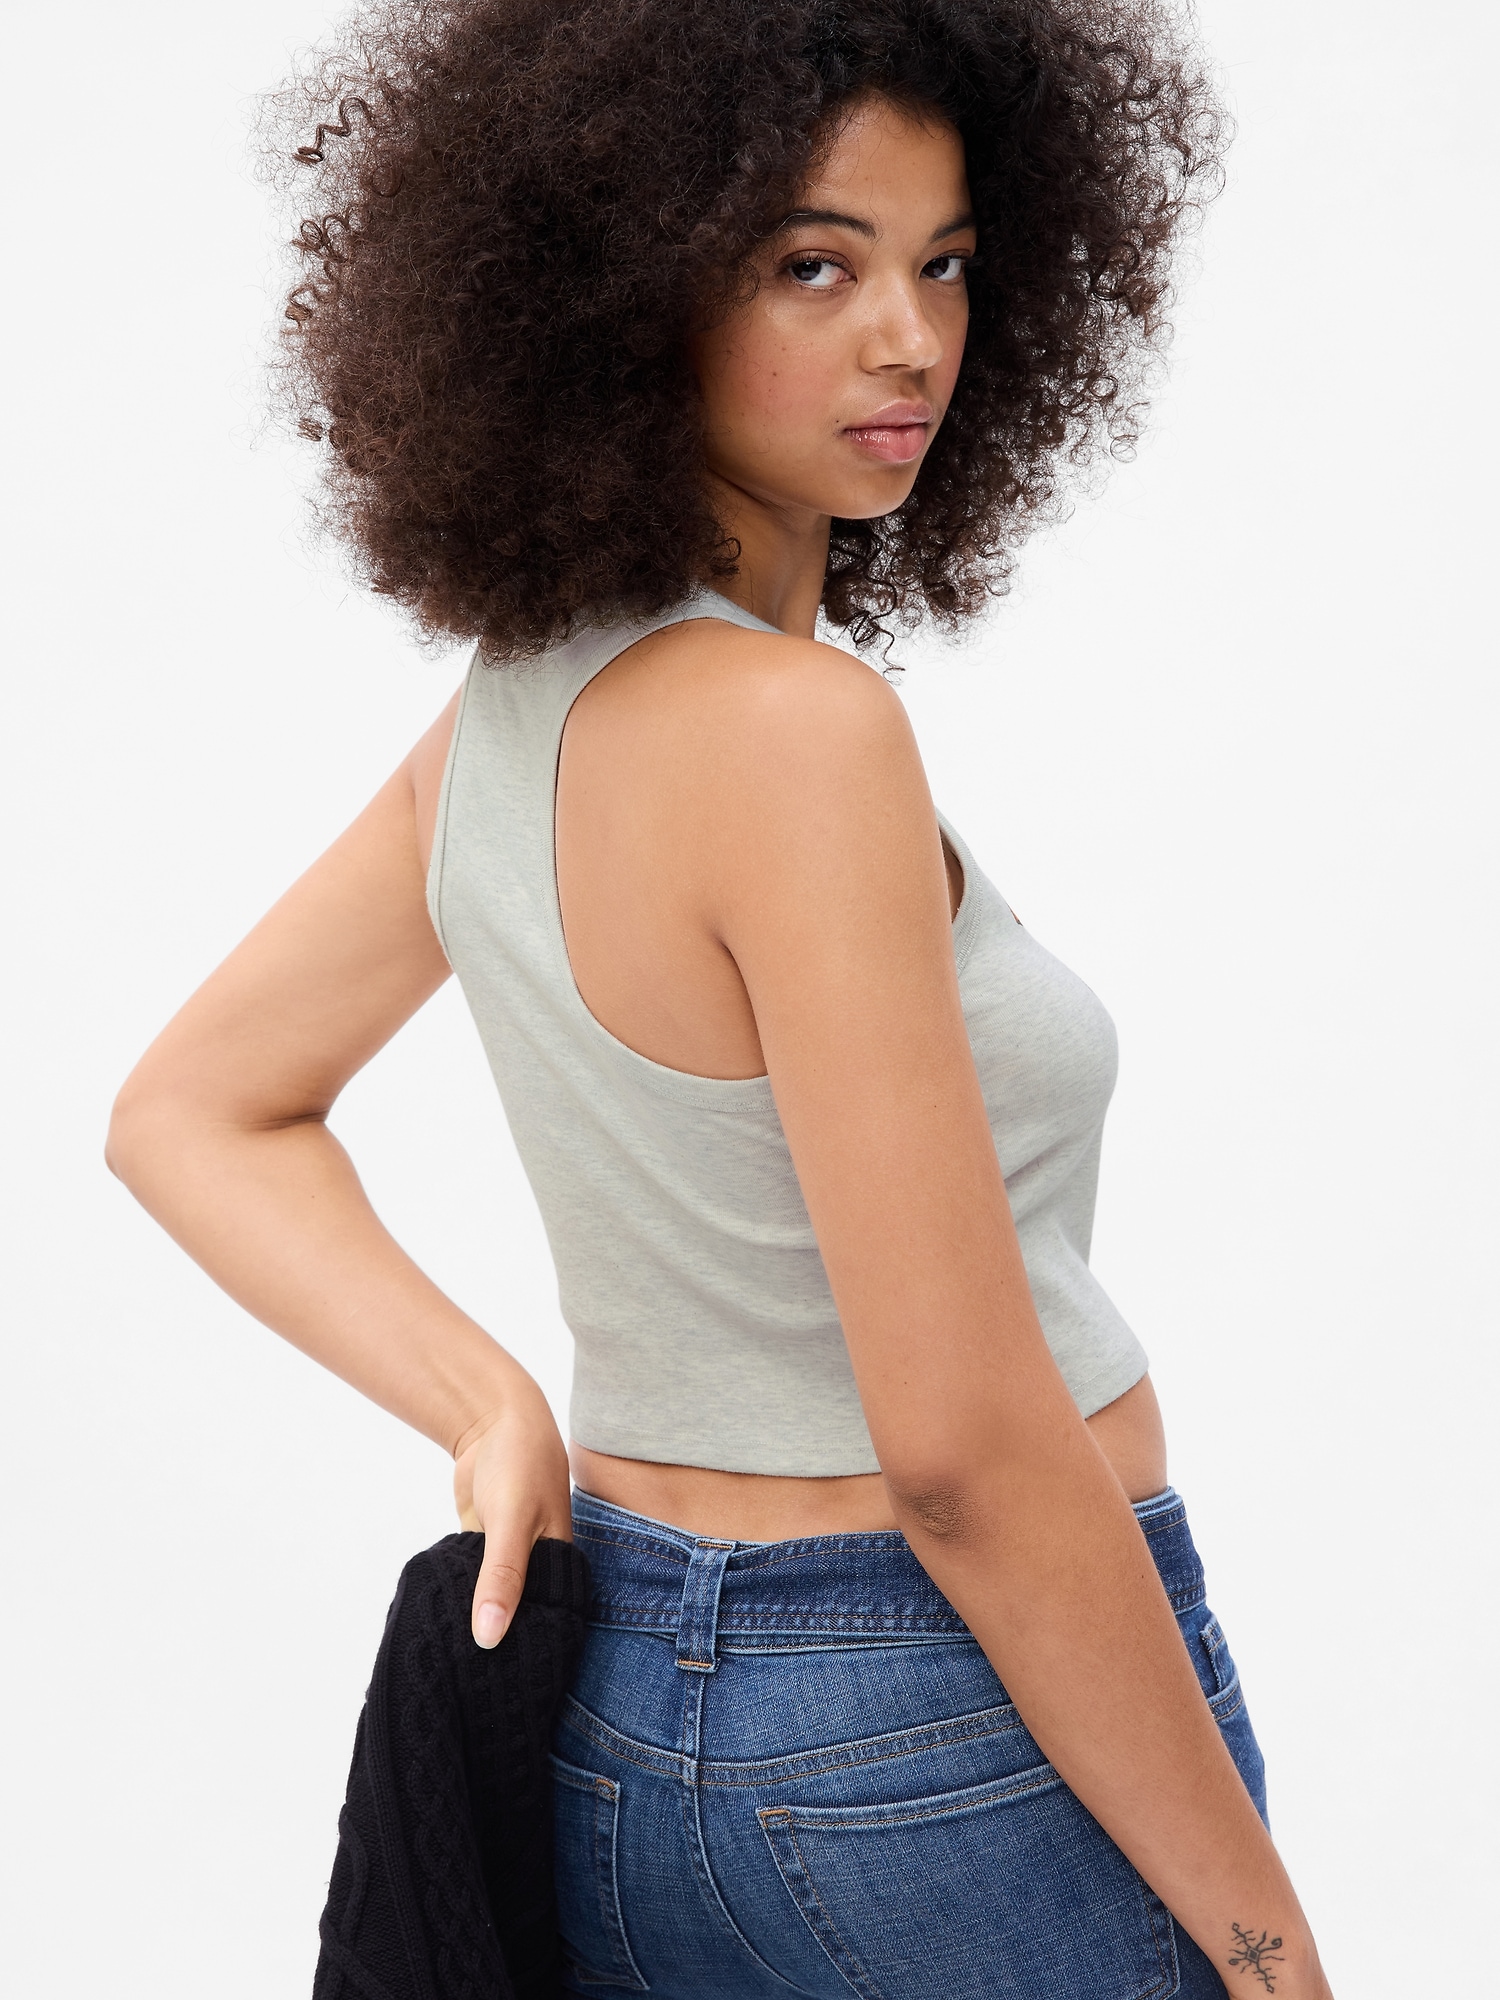 PROJECT GAP Cropped Graphic Tank Top | Gap